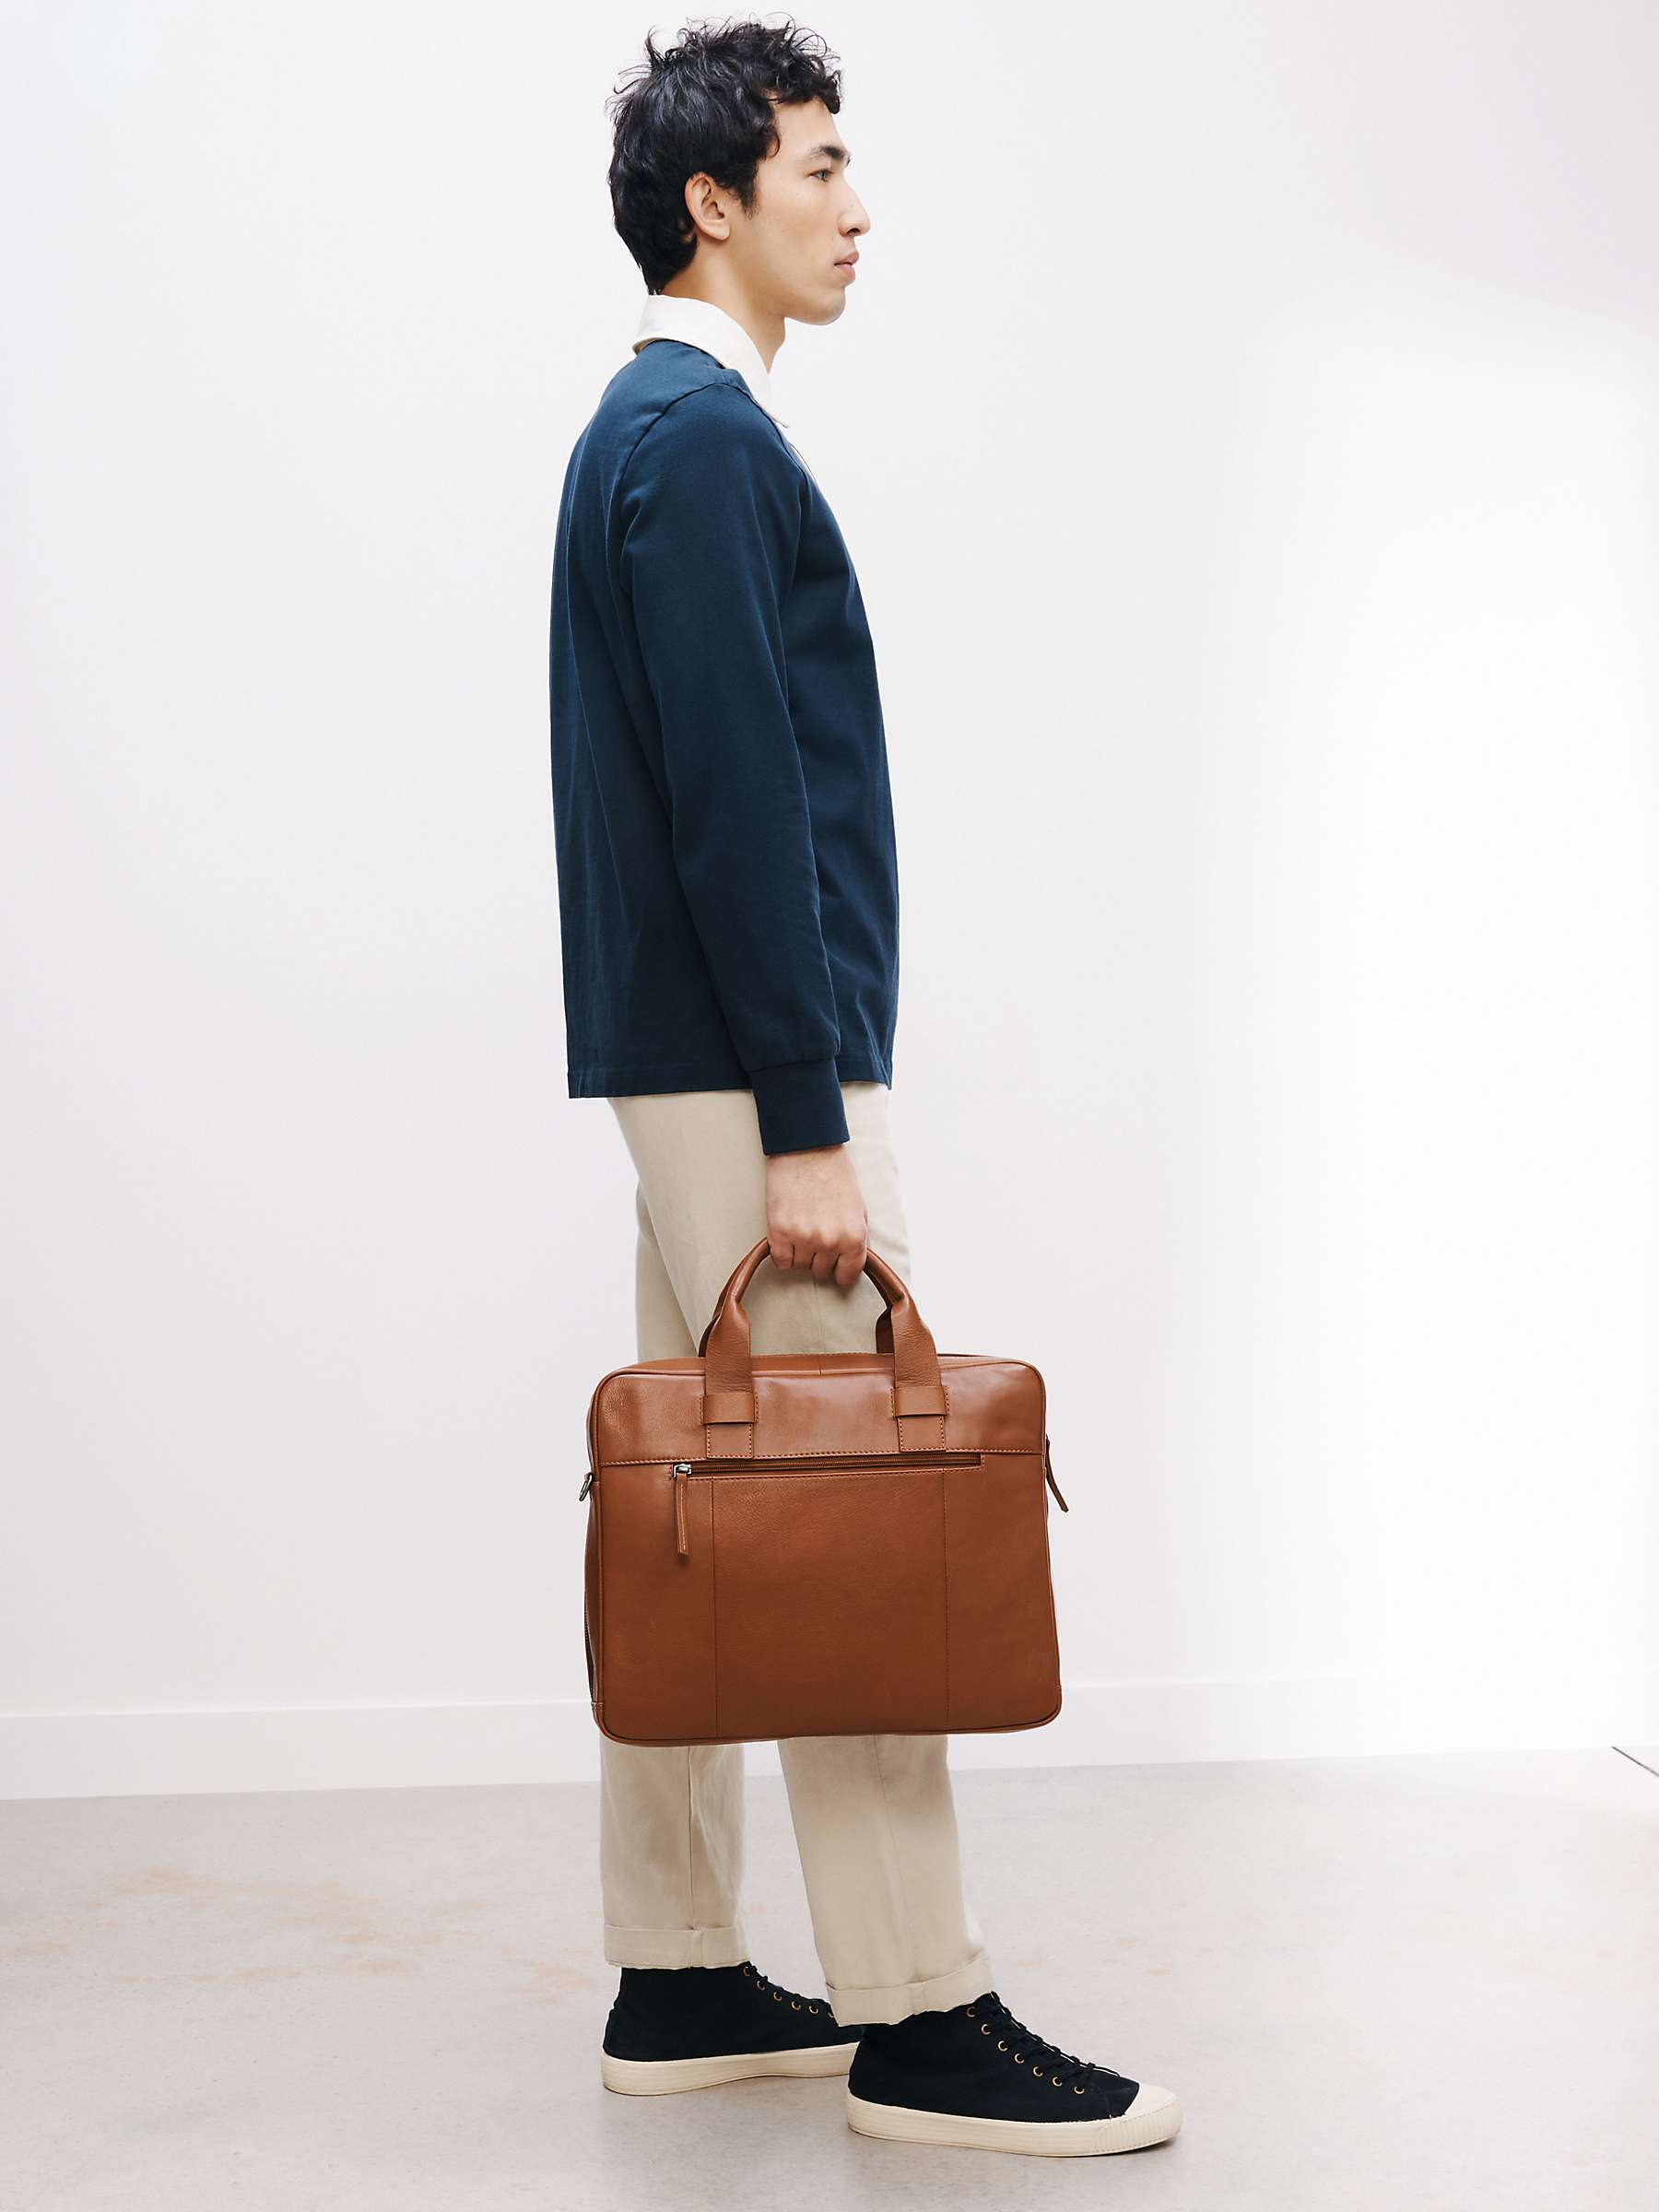 Buy John Lewis Oslo Leather Briefcase Online at johnlewis.com